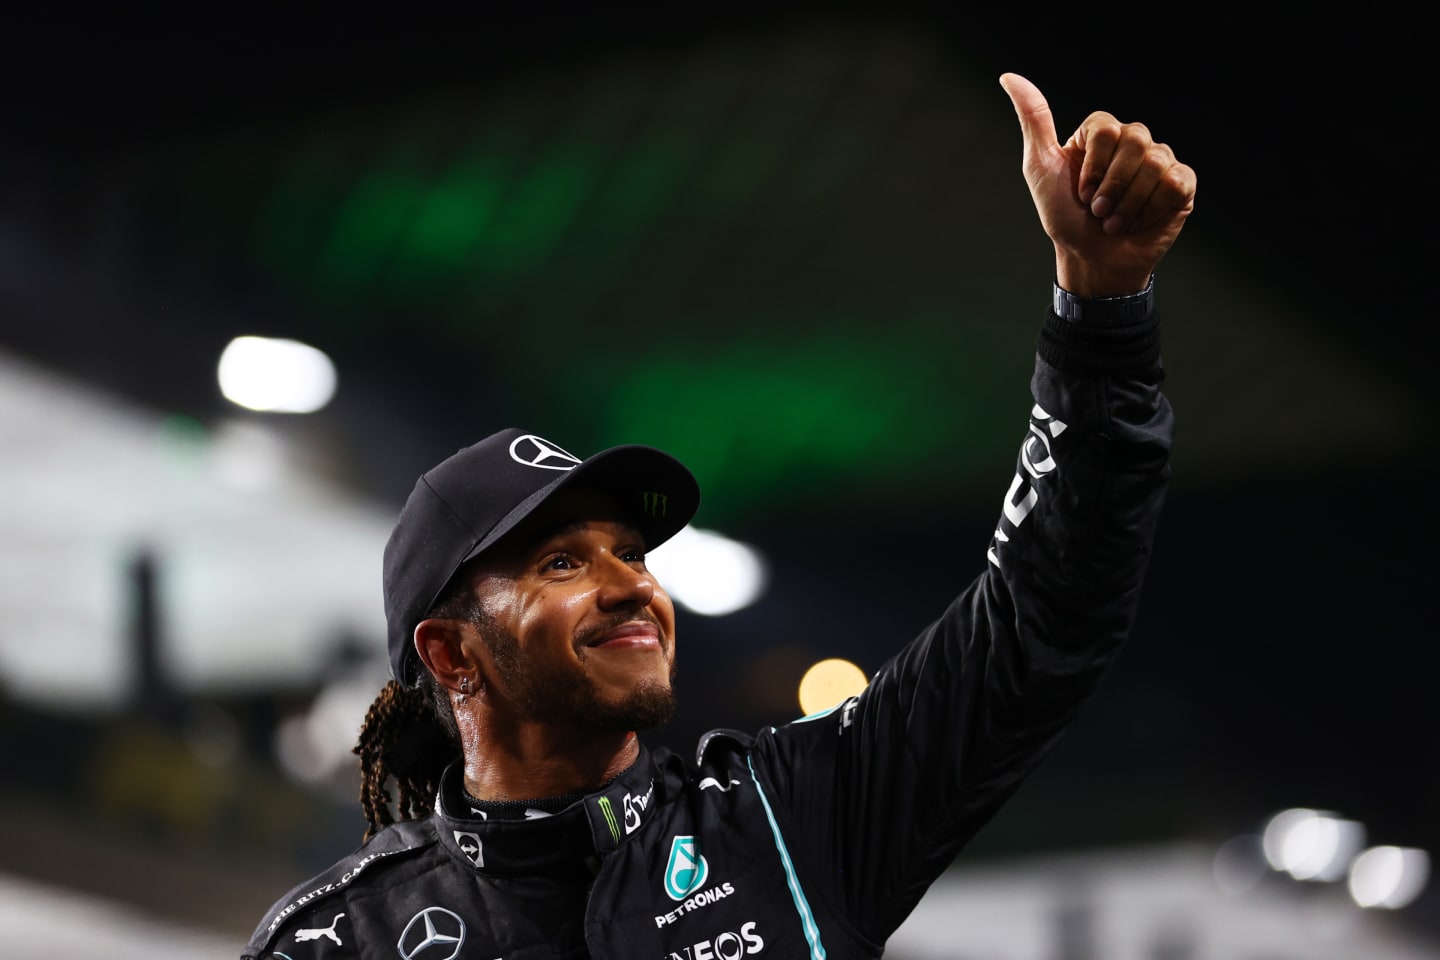 JEDDAH, SAUDI ARABIA - DECEMBER 04: Pole position qualifier Lewis Hamilton of Great Britain and Mercedes GP celebrates in parc ferme during qualifying ahead of the F1 Grand Prix of Saudi Arabia at Jeddah Corniche Circuit on December 04, 2021 in Jeddah, Saudi Arabia. (Photo by Bryn Lennon - Formula 1/Formula 1 via Getty Images)